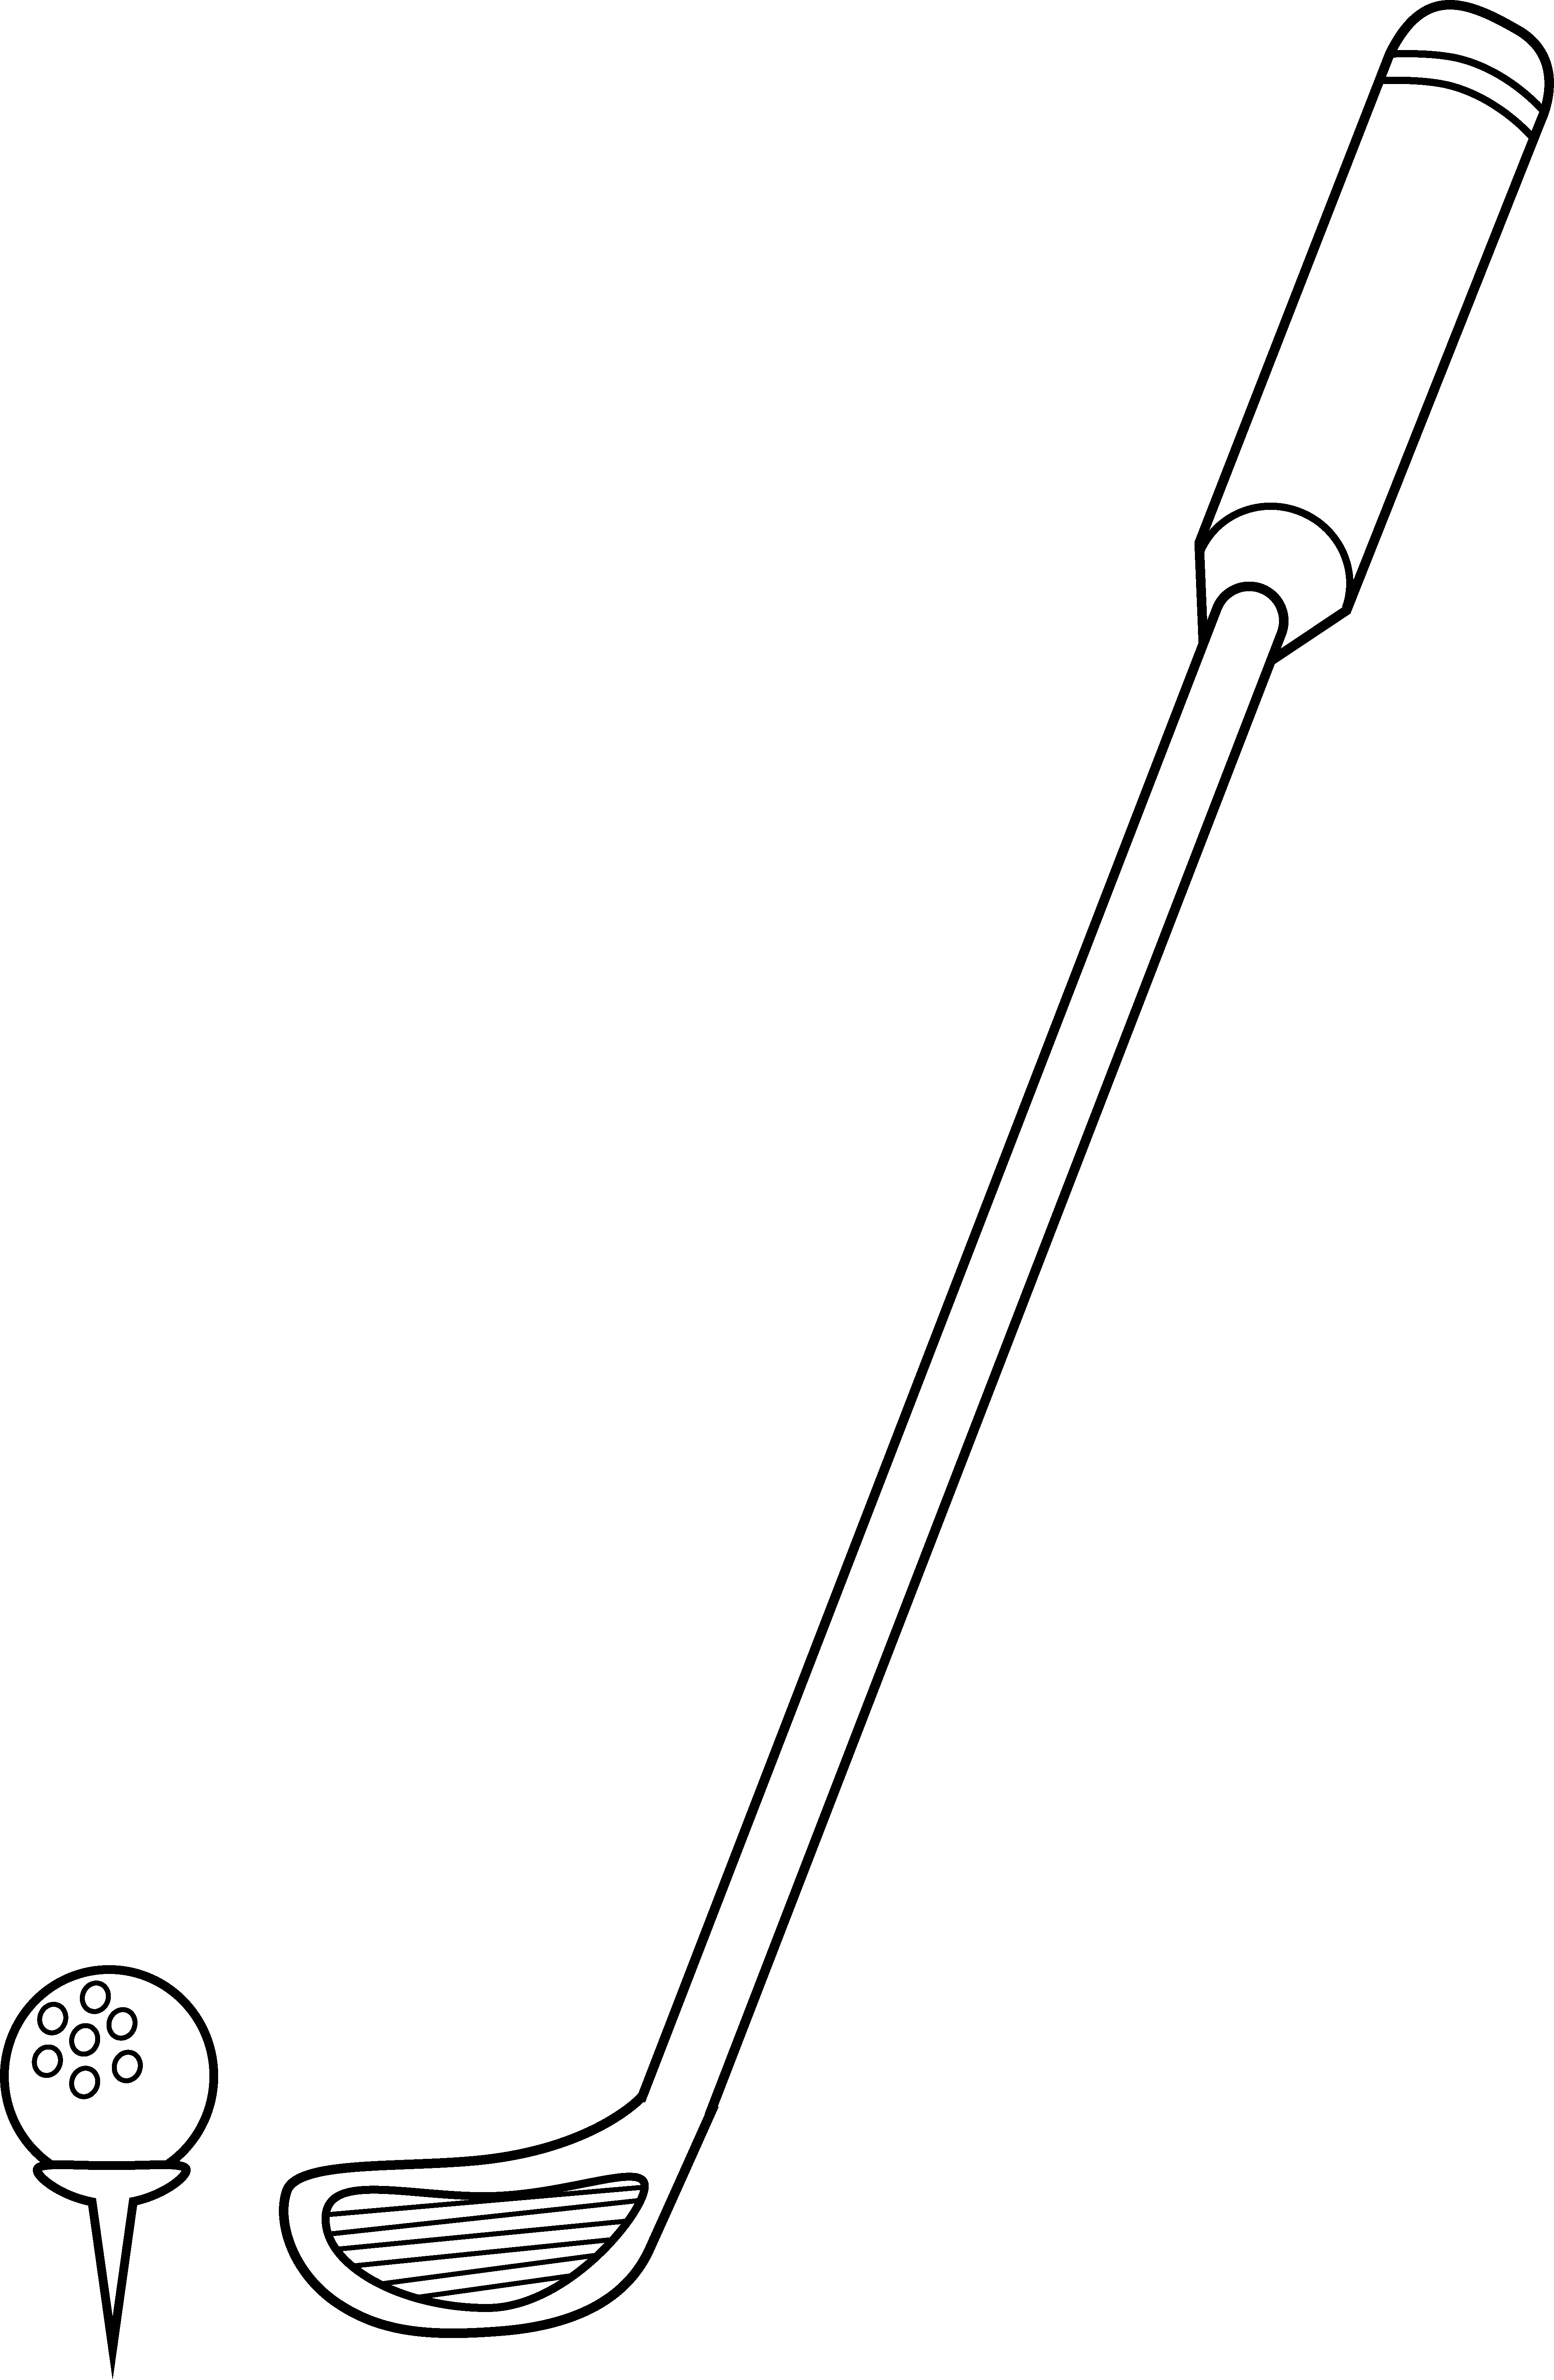 Golf tee and ball club clipart black and white 